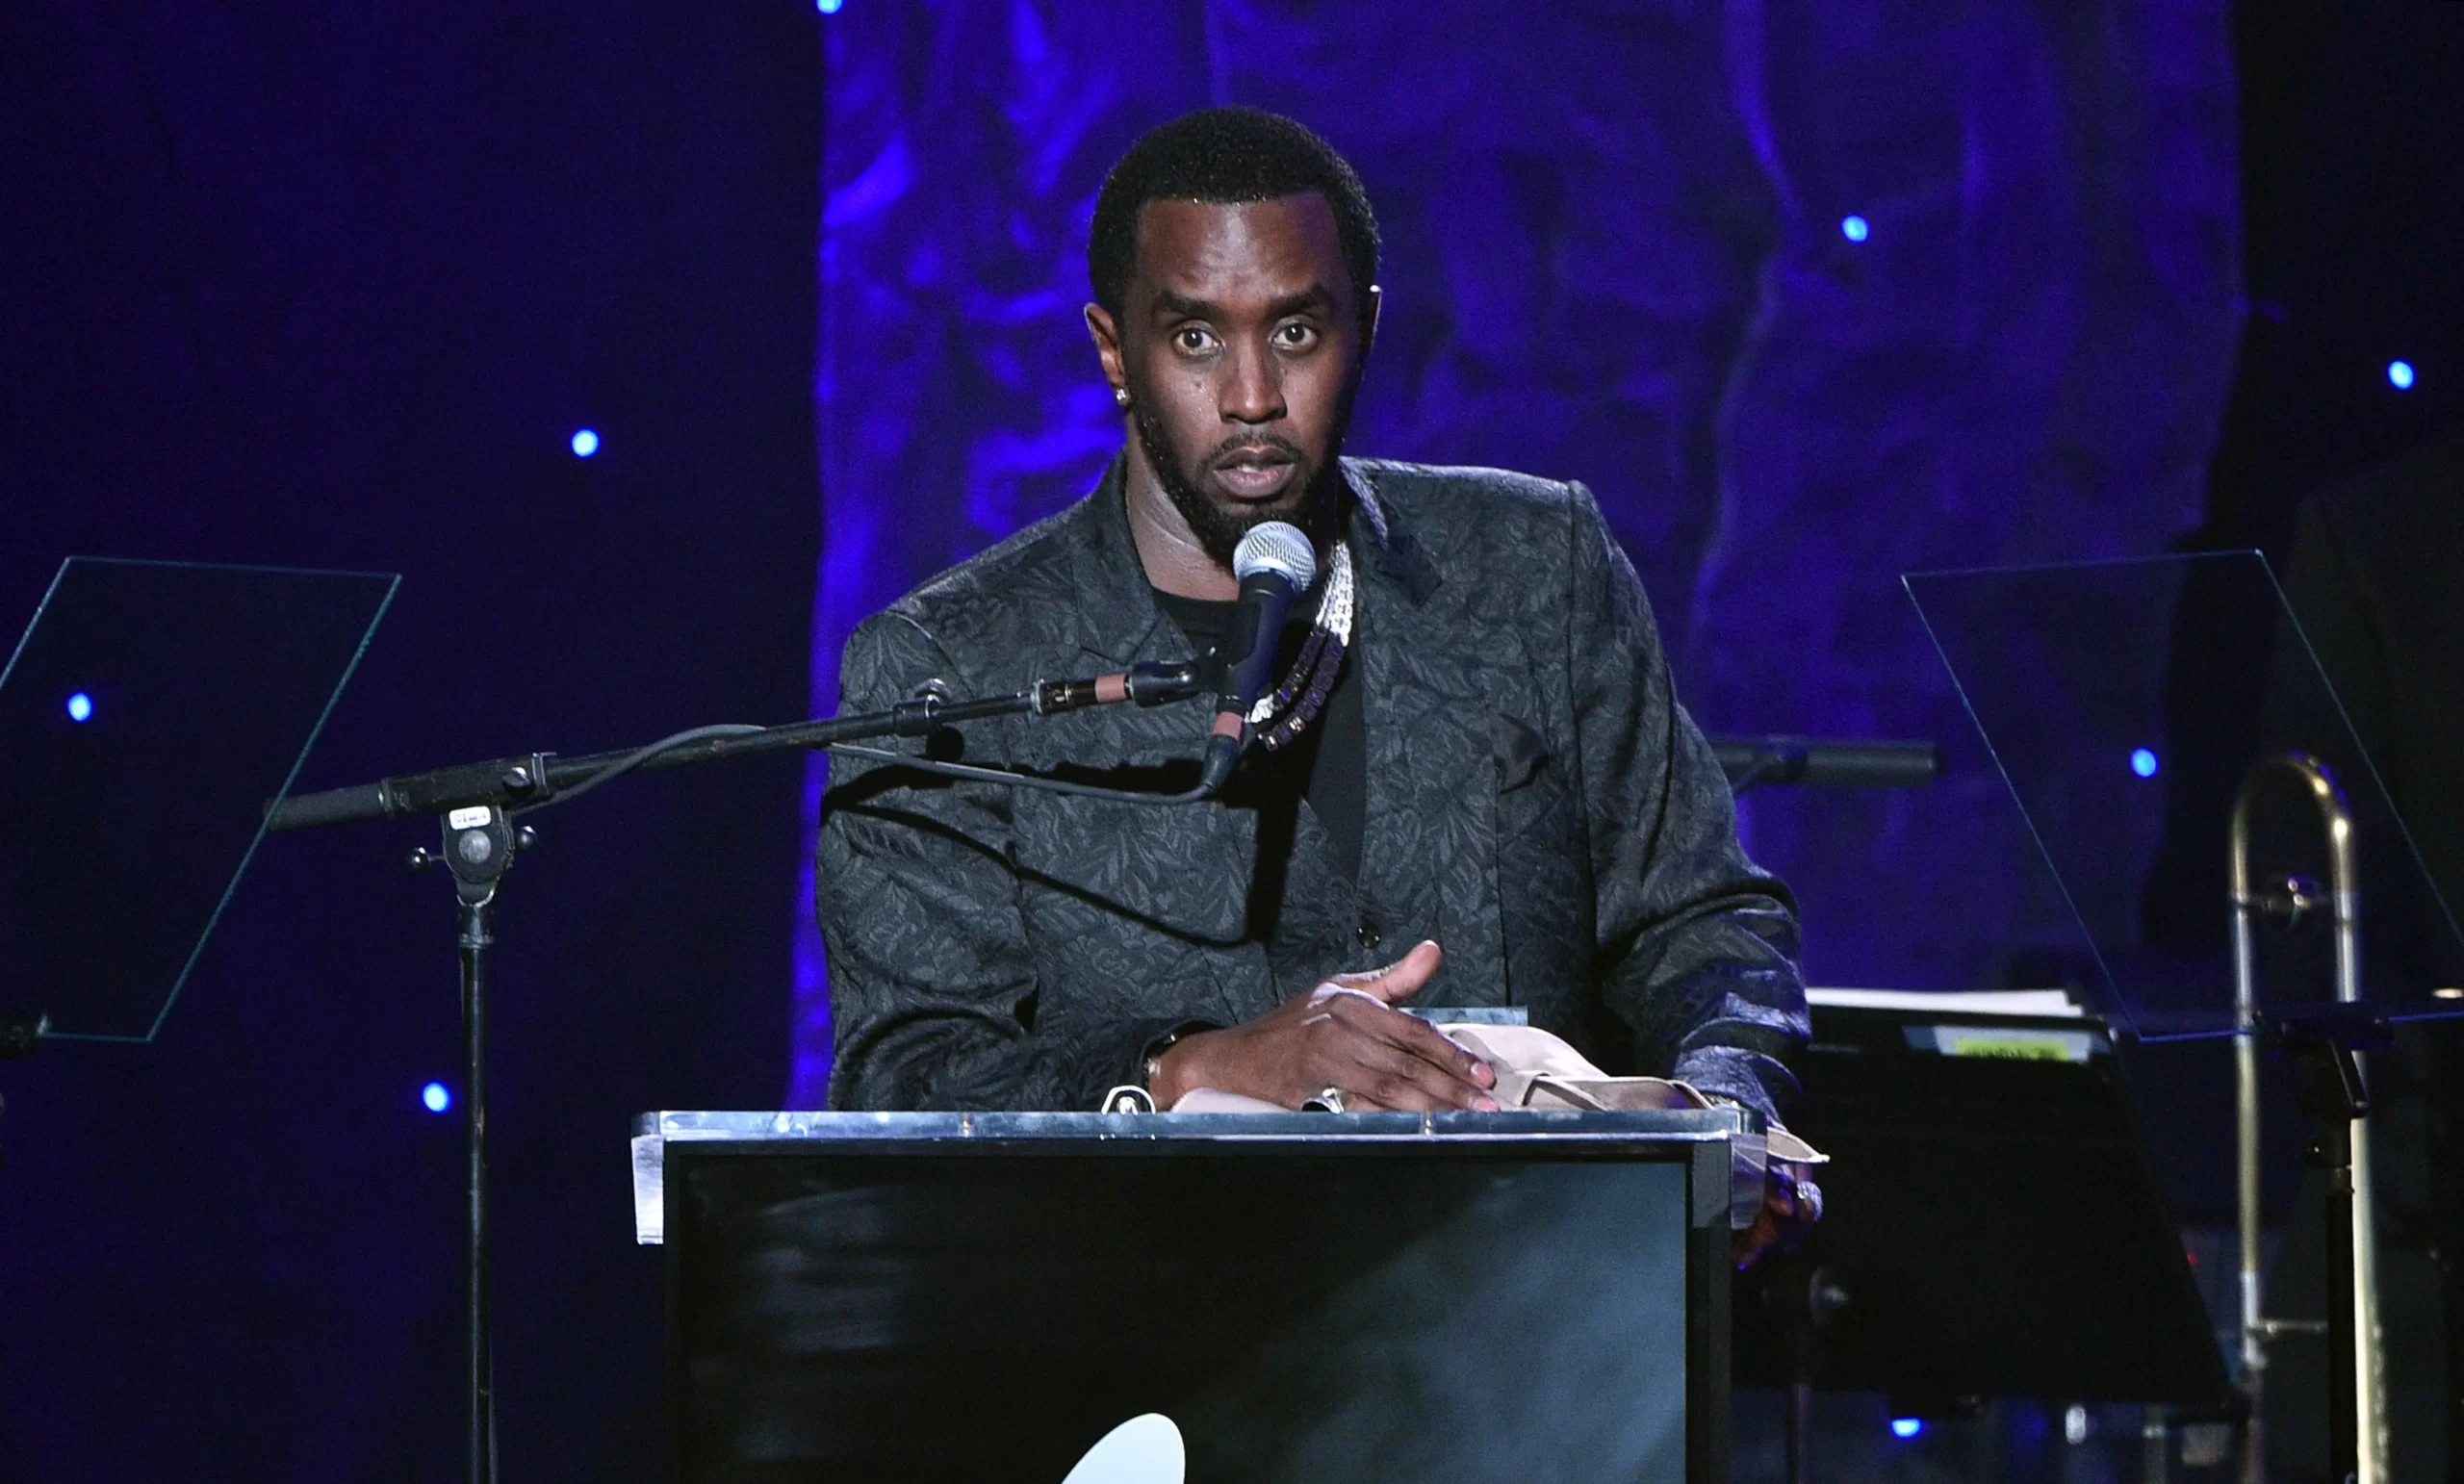 Diddy’s Grammy Awards Attendance Still in Limbo, No Decision Made on Possible Ban After Sexual Assault Lawsuits